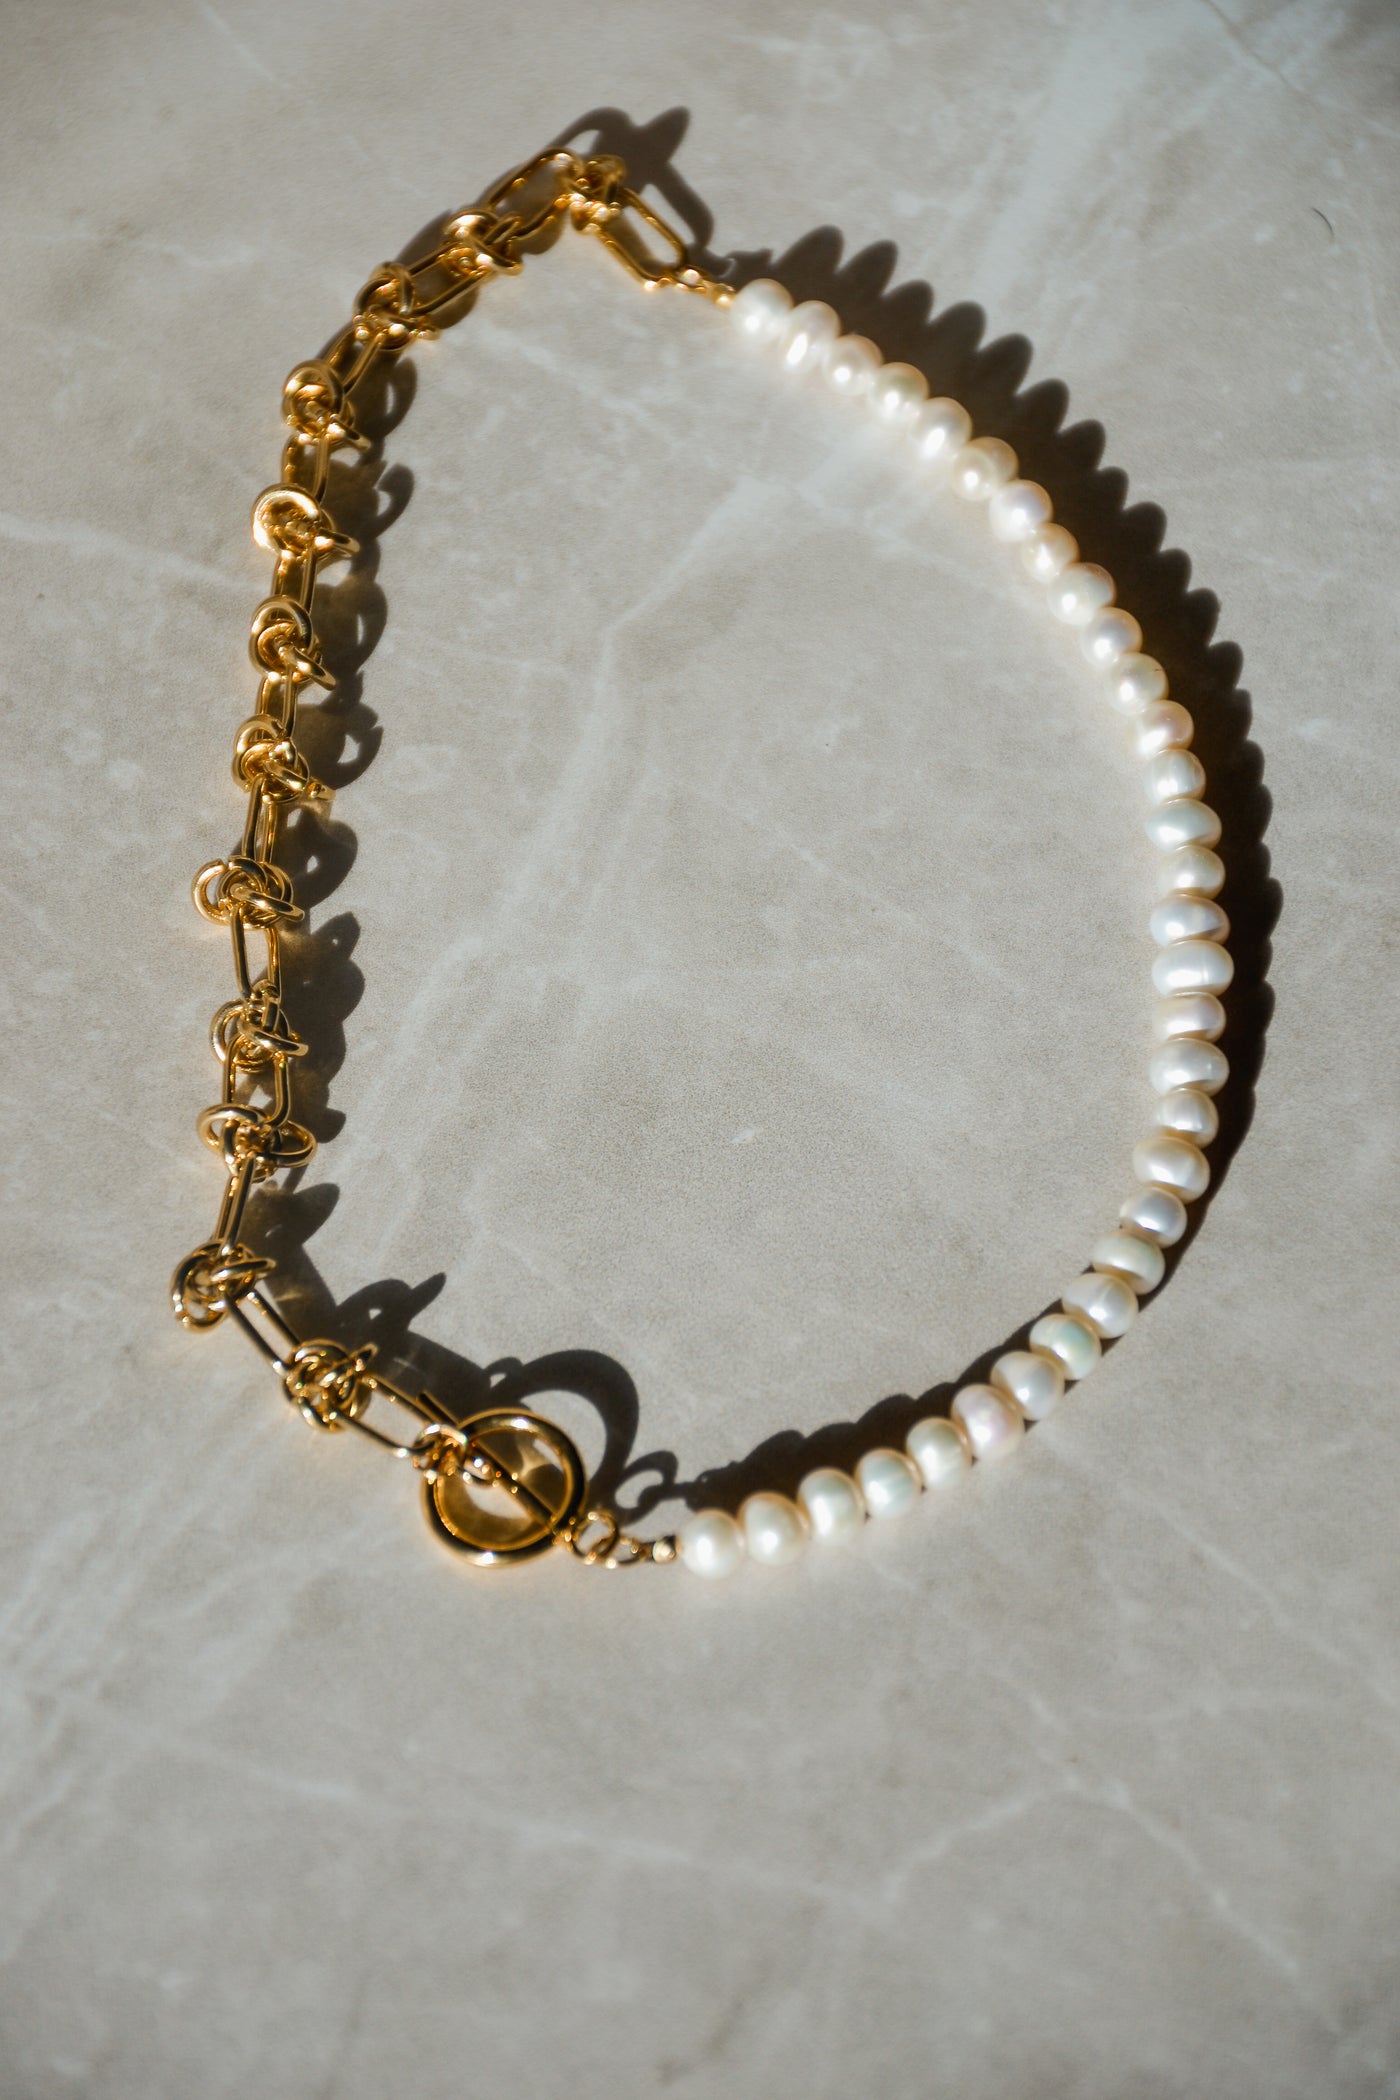 Pearl and Chain Necklace or Bracelet